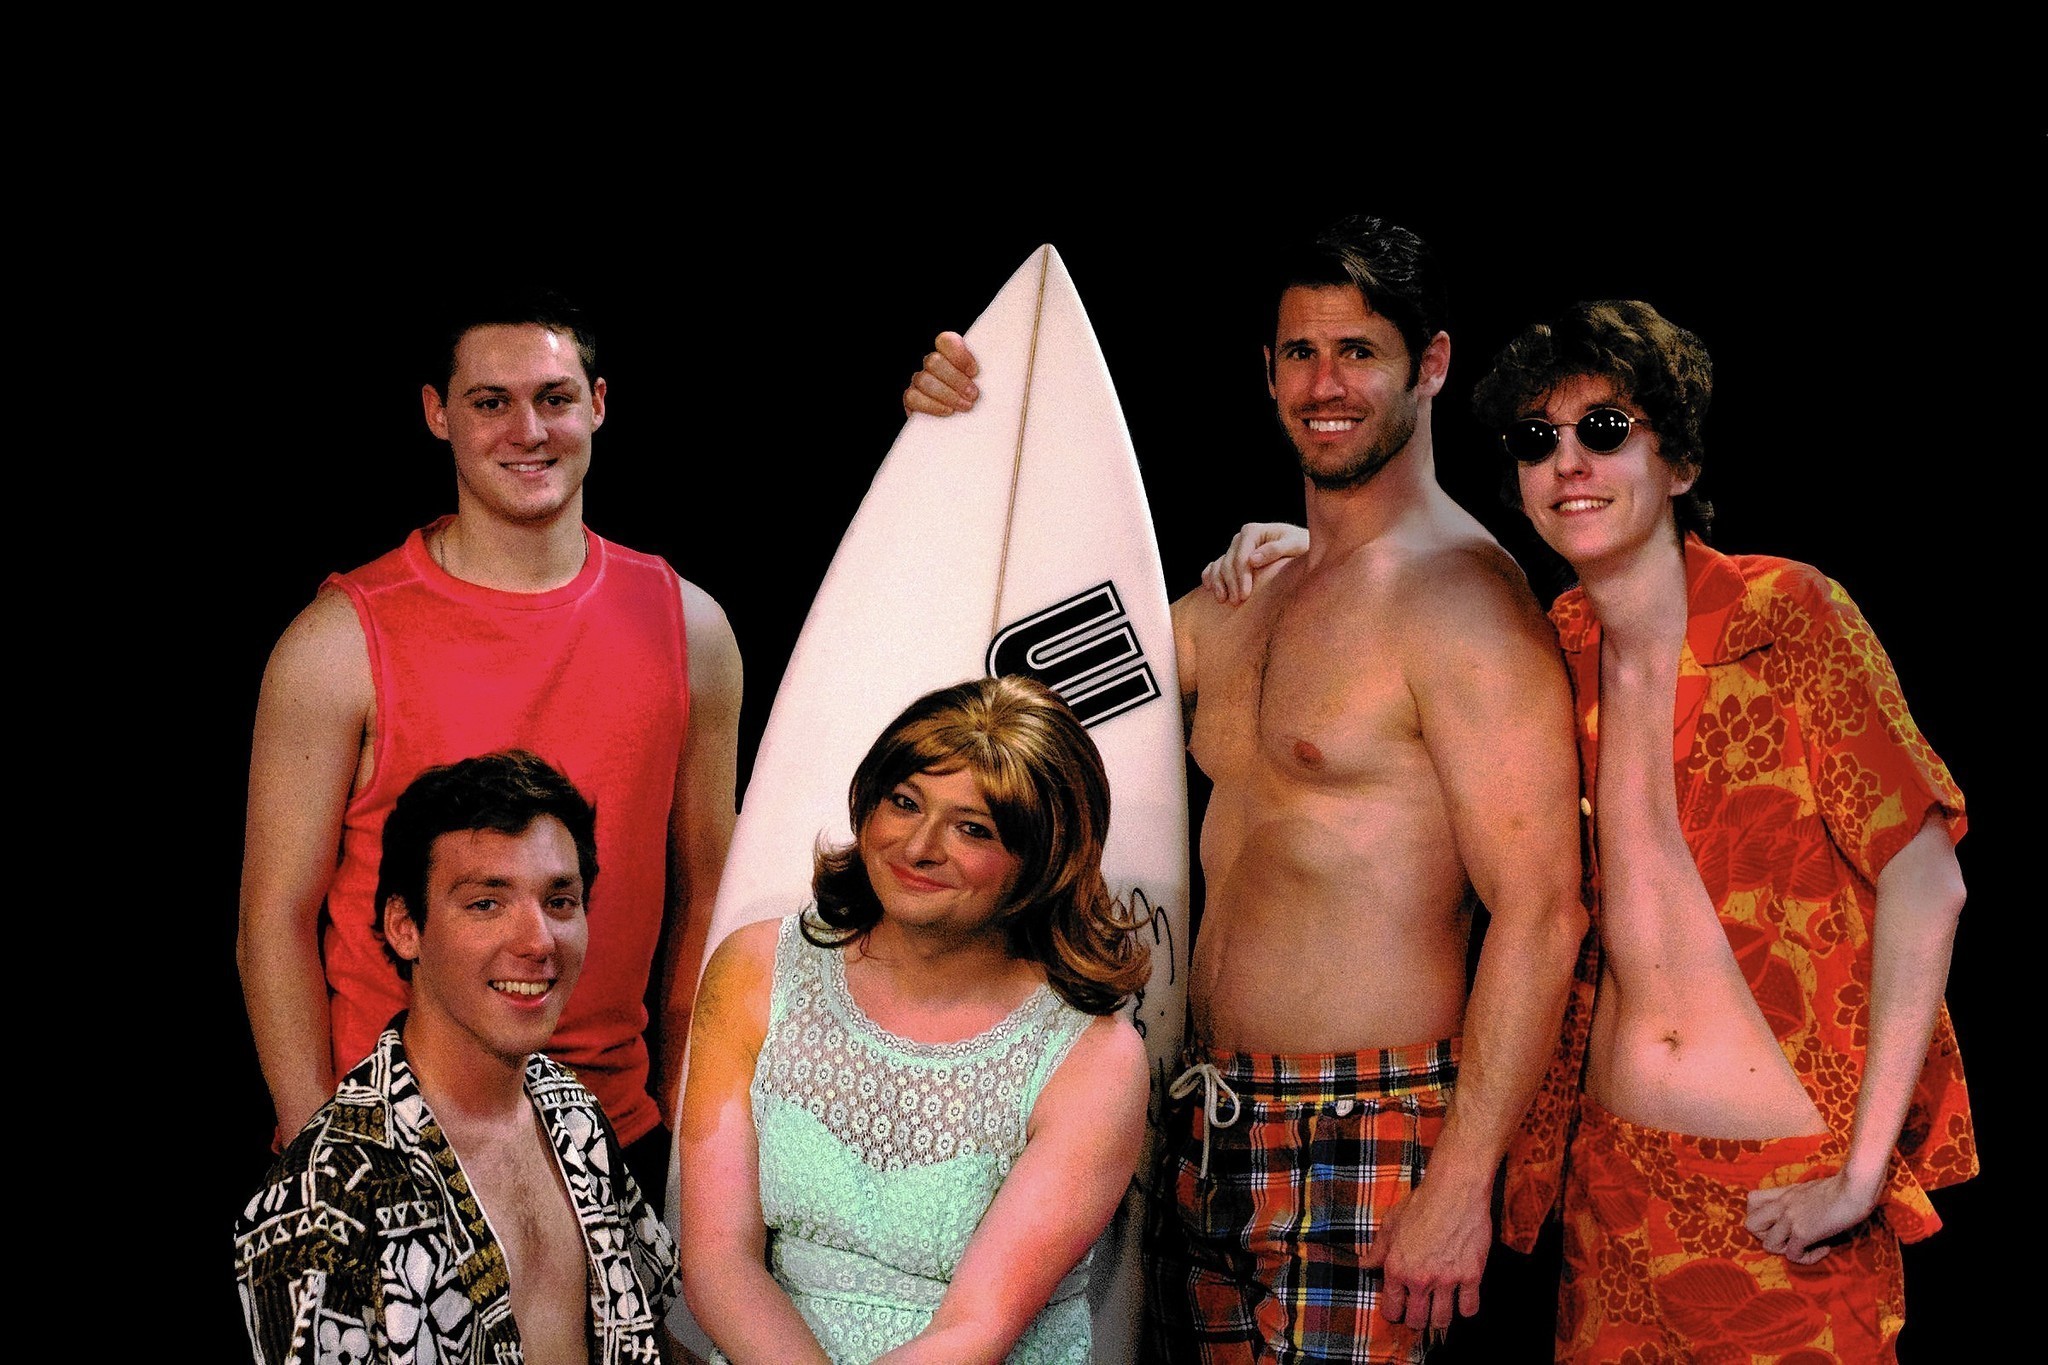 Theatre Downtown opens 'Psycho Beach Party' - Orlando Sentinel2048 x 1365